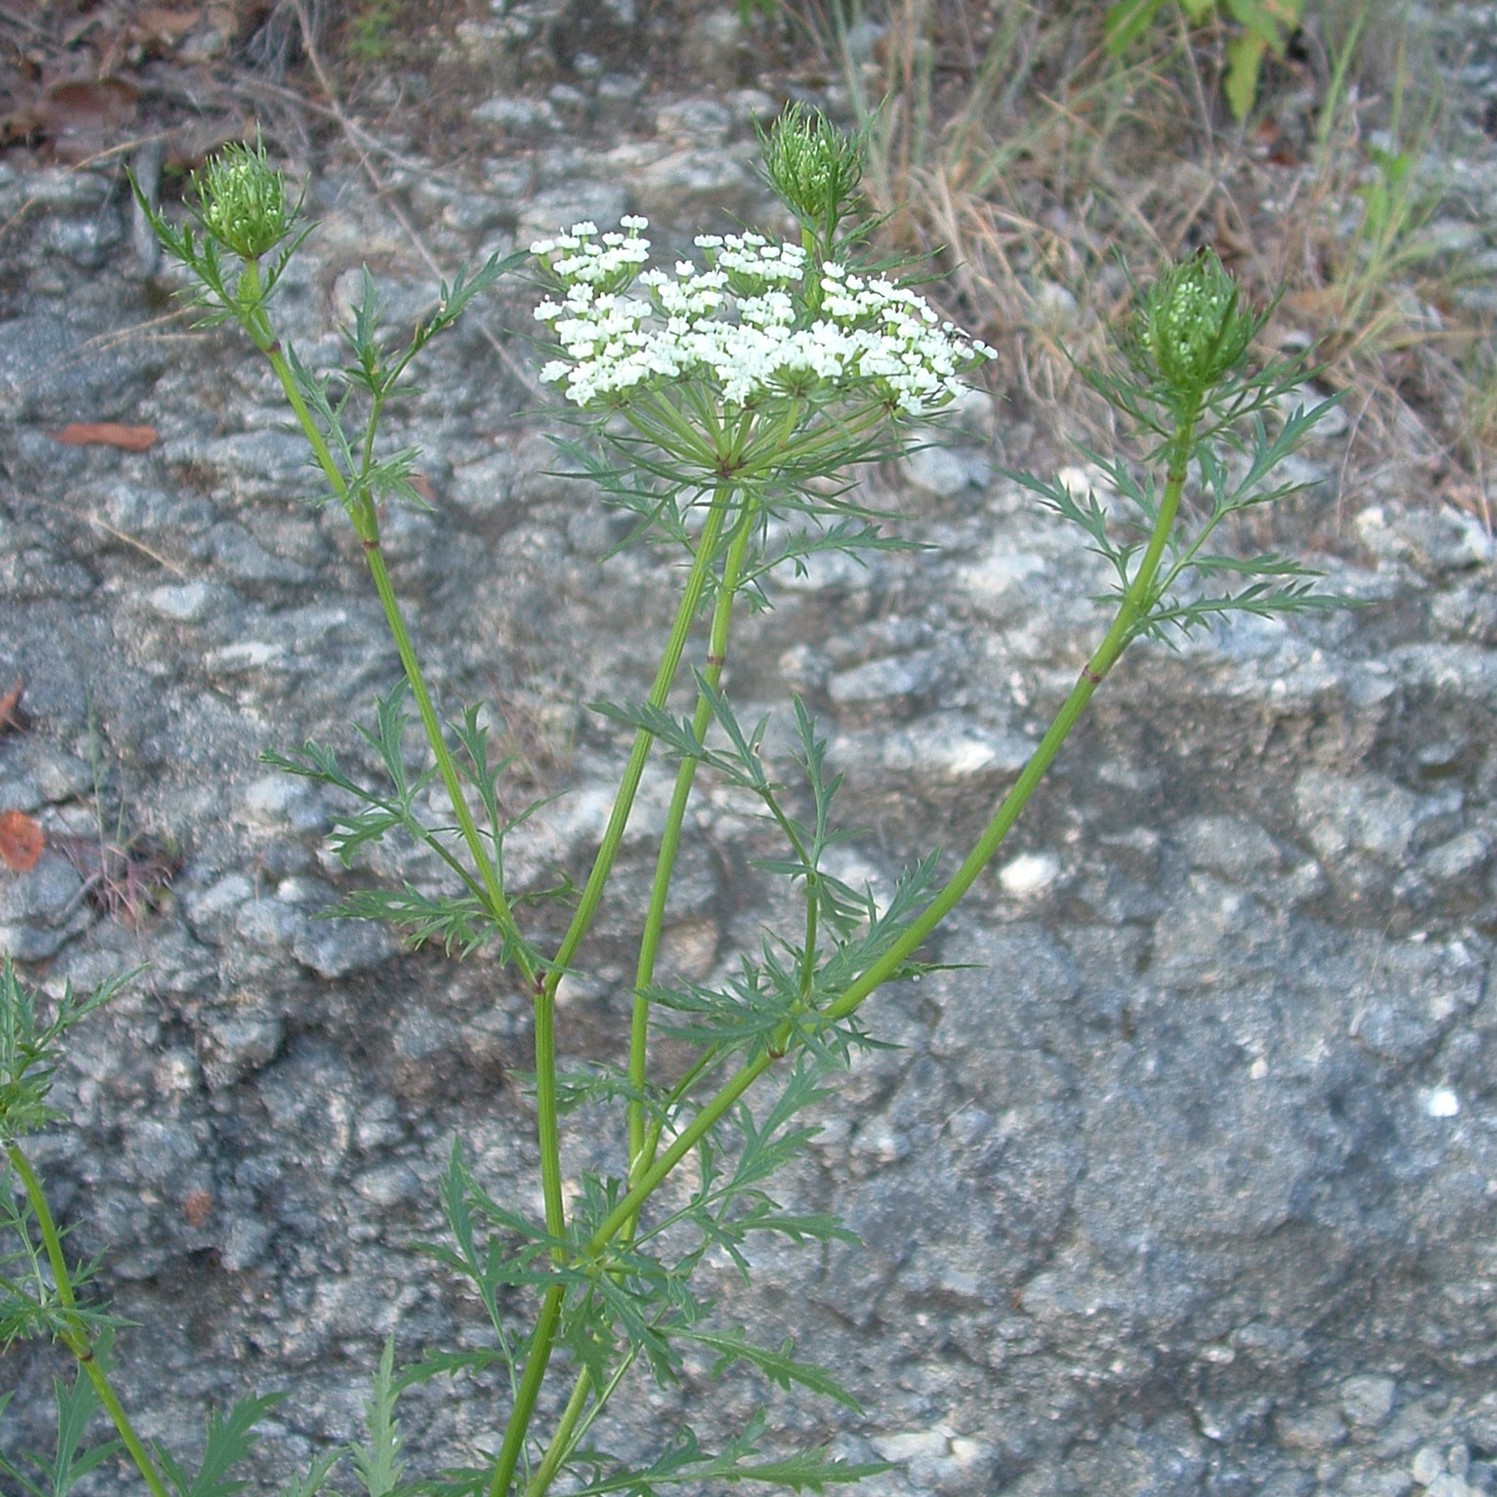 Close up of Daucosma laciniata in flower, with the white flowers within the umbel and the divided bracts.